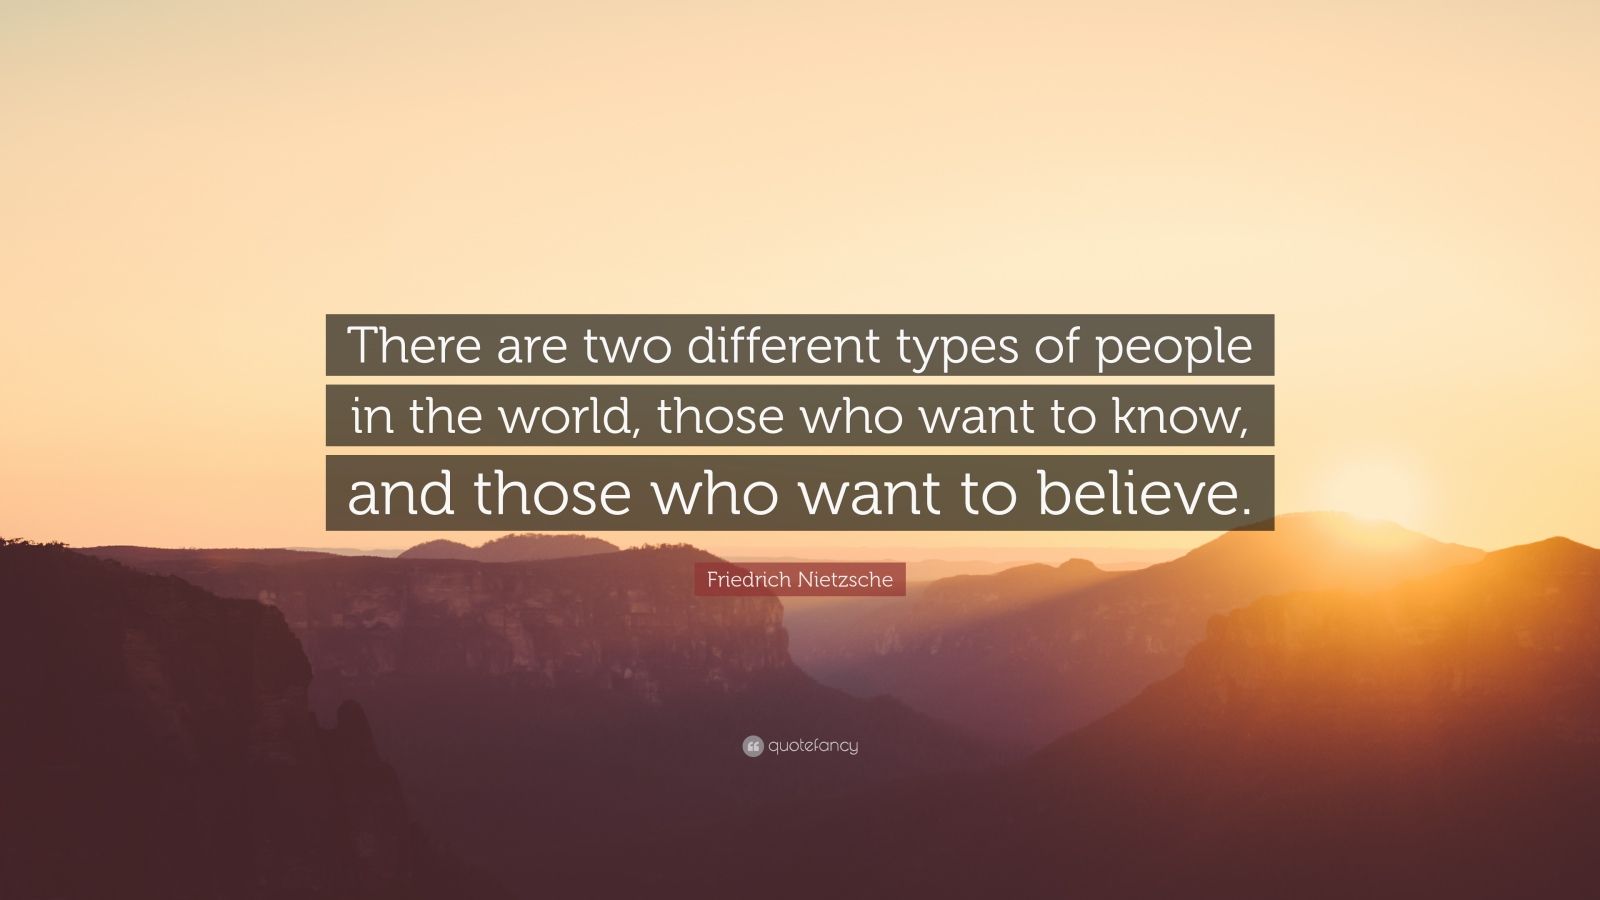 Friedrich Nietzsche Quote: “There are two different types of people in ...